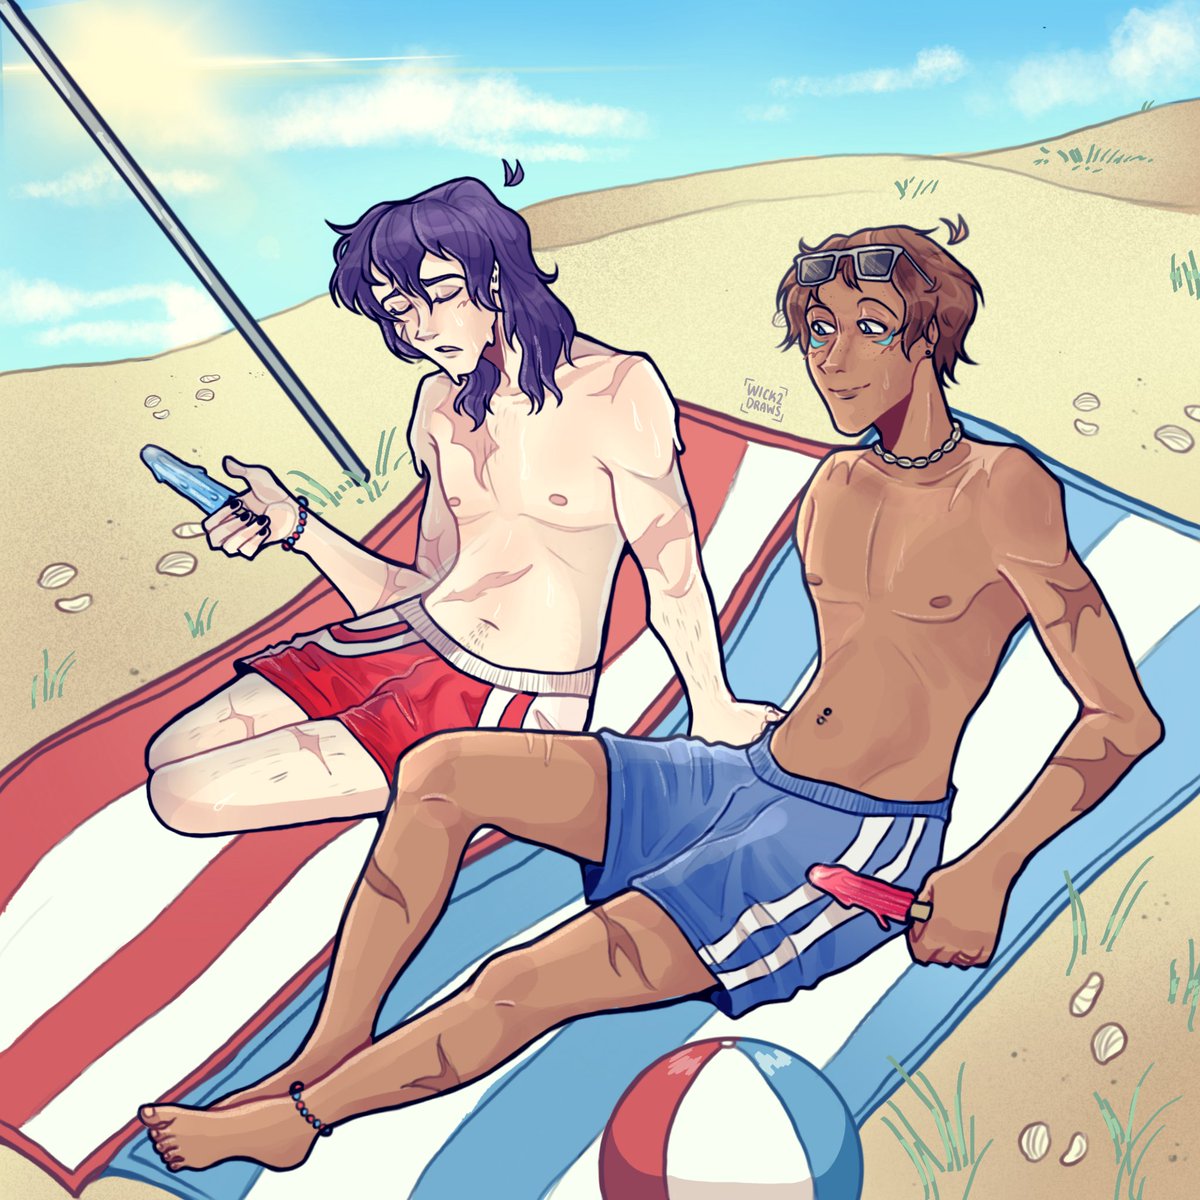 bleep’s 4k dtiys!! 
(had to put aside my distain of drawing backgrounds for this one) 
#klance #vld #voltron #keithkogane #lancemcclain